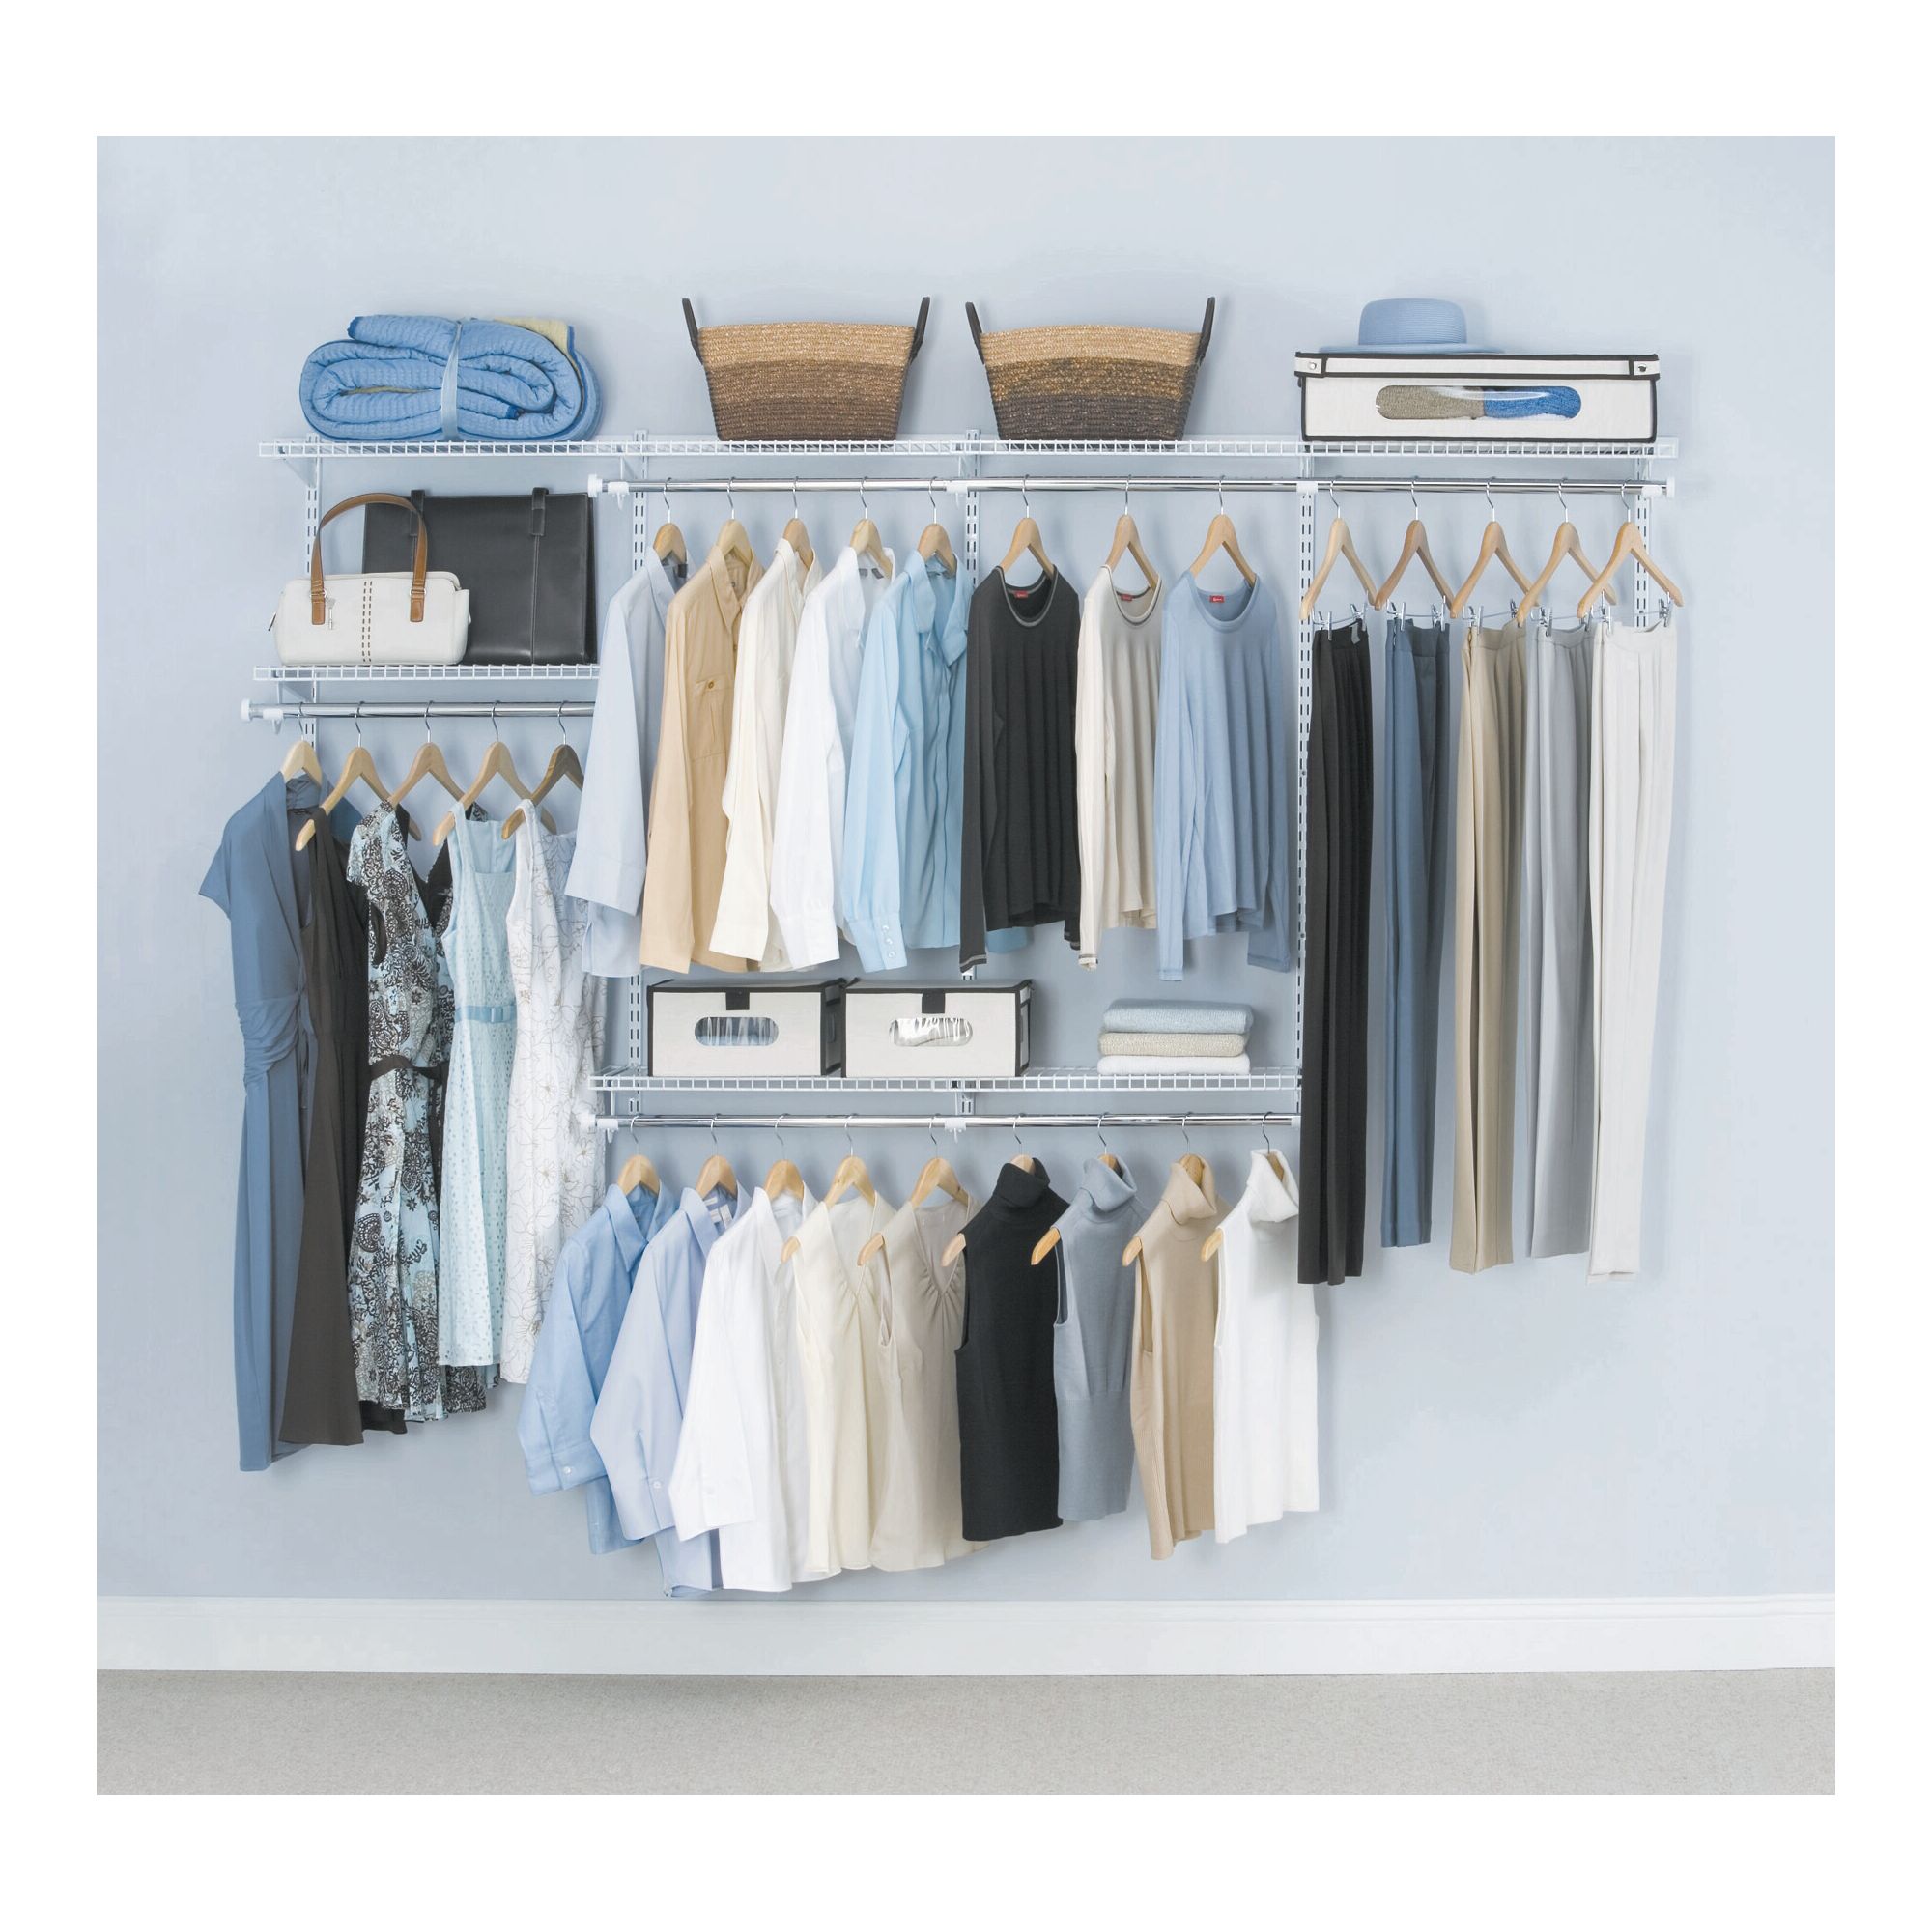 Rubbermaid FastTrack 5 Ft. to 7 Ft. Closet Organization Kit